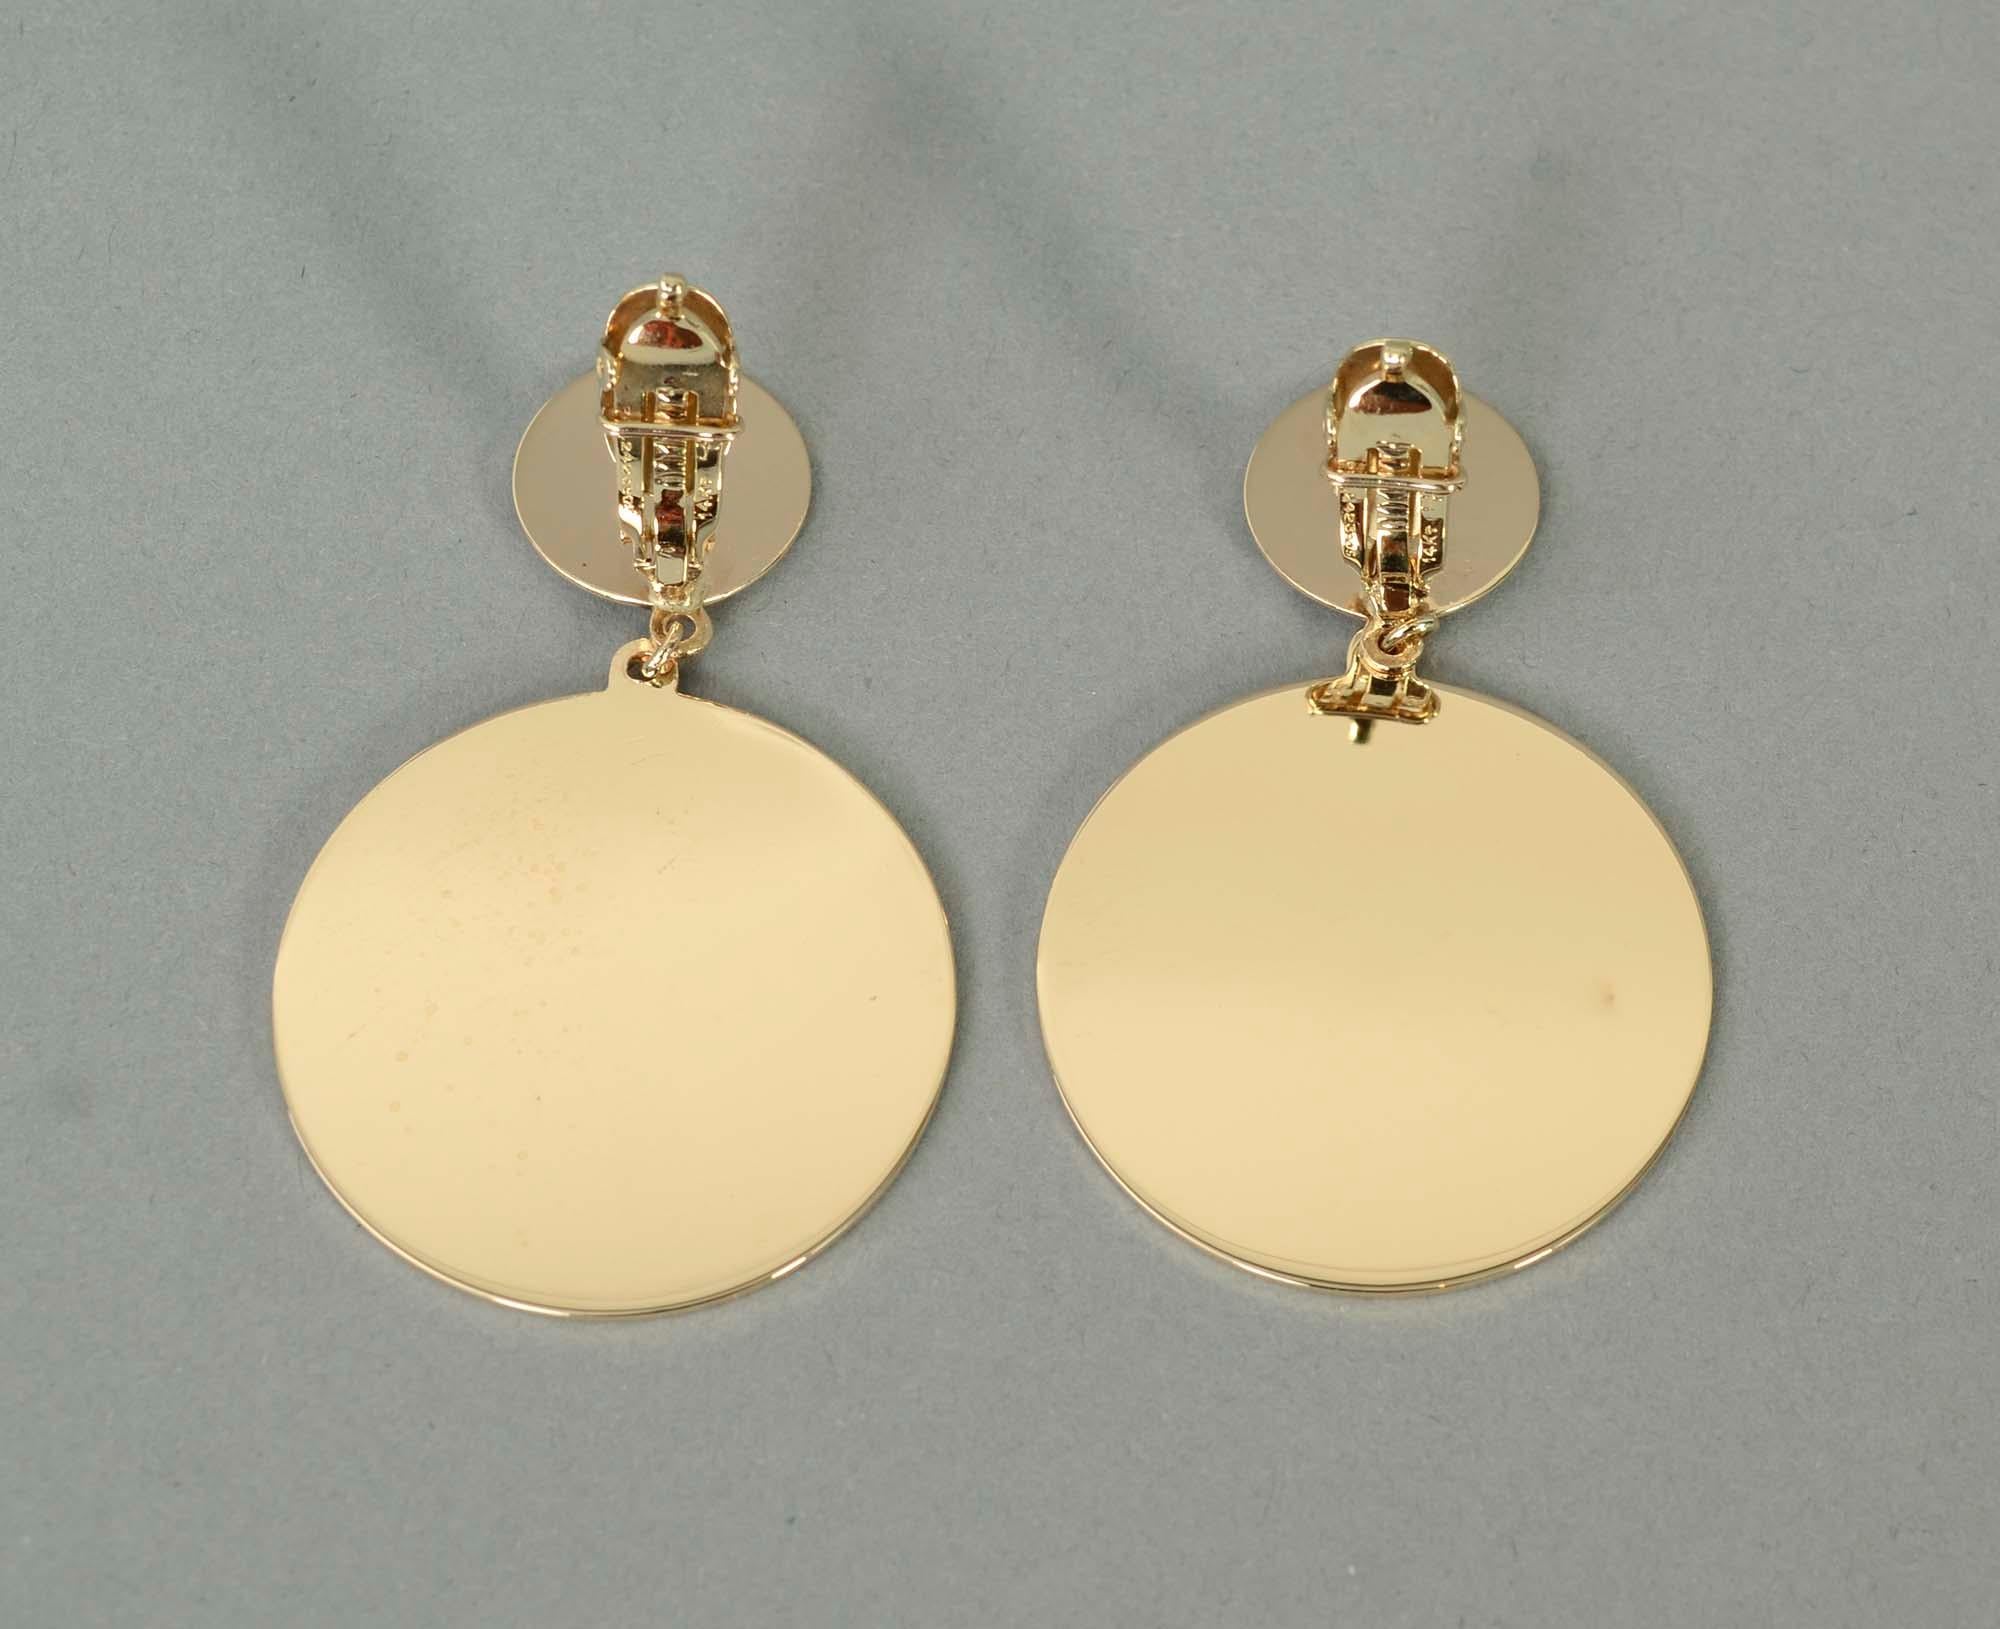 Retro earrings of two circular discs. The top one measures half an inch in diameter; the bottom one is 1  5/16